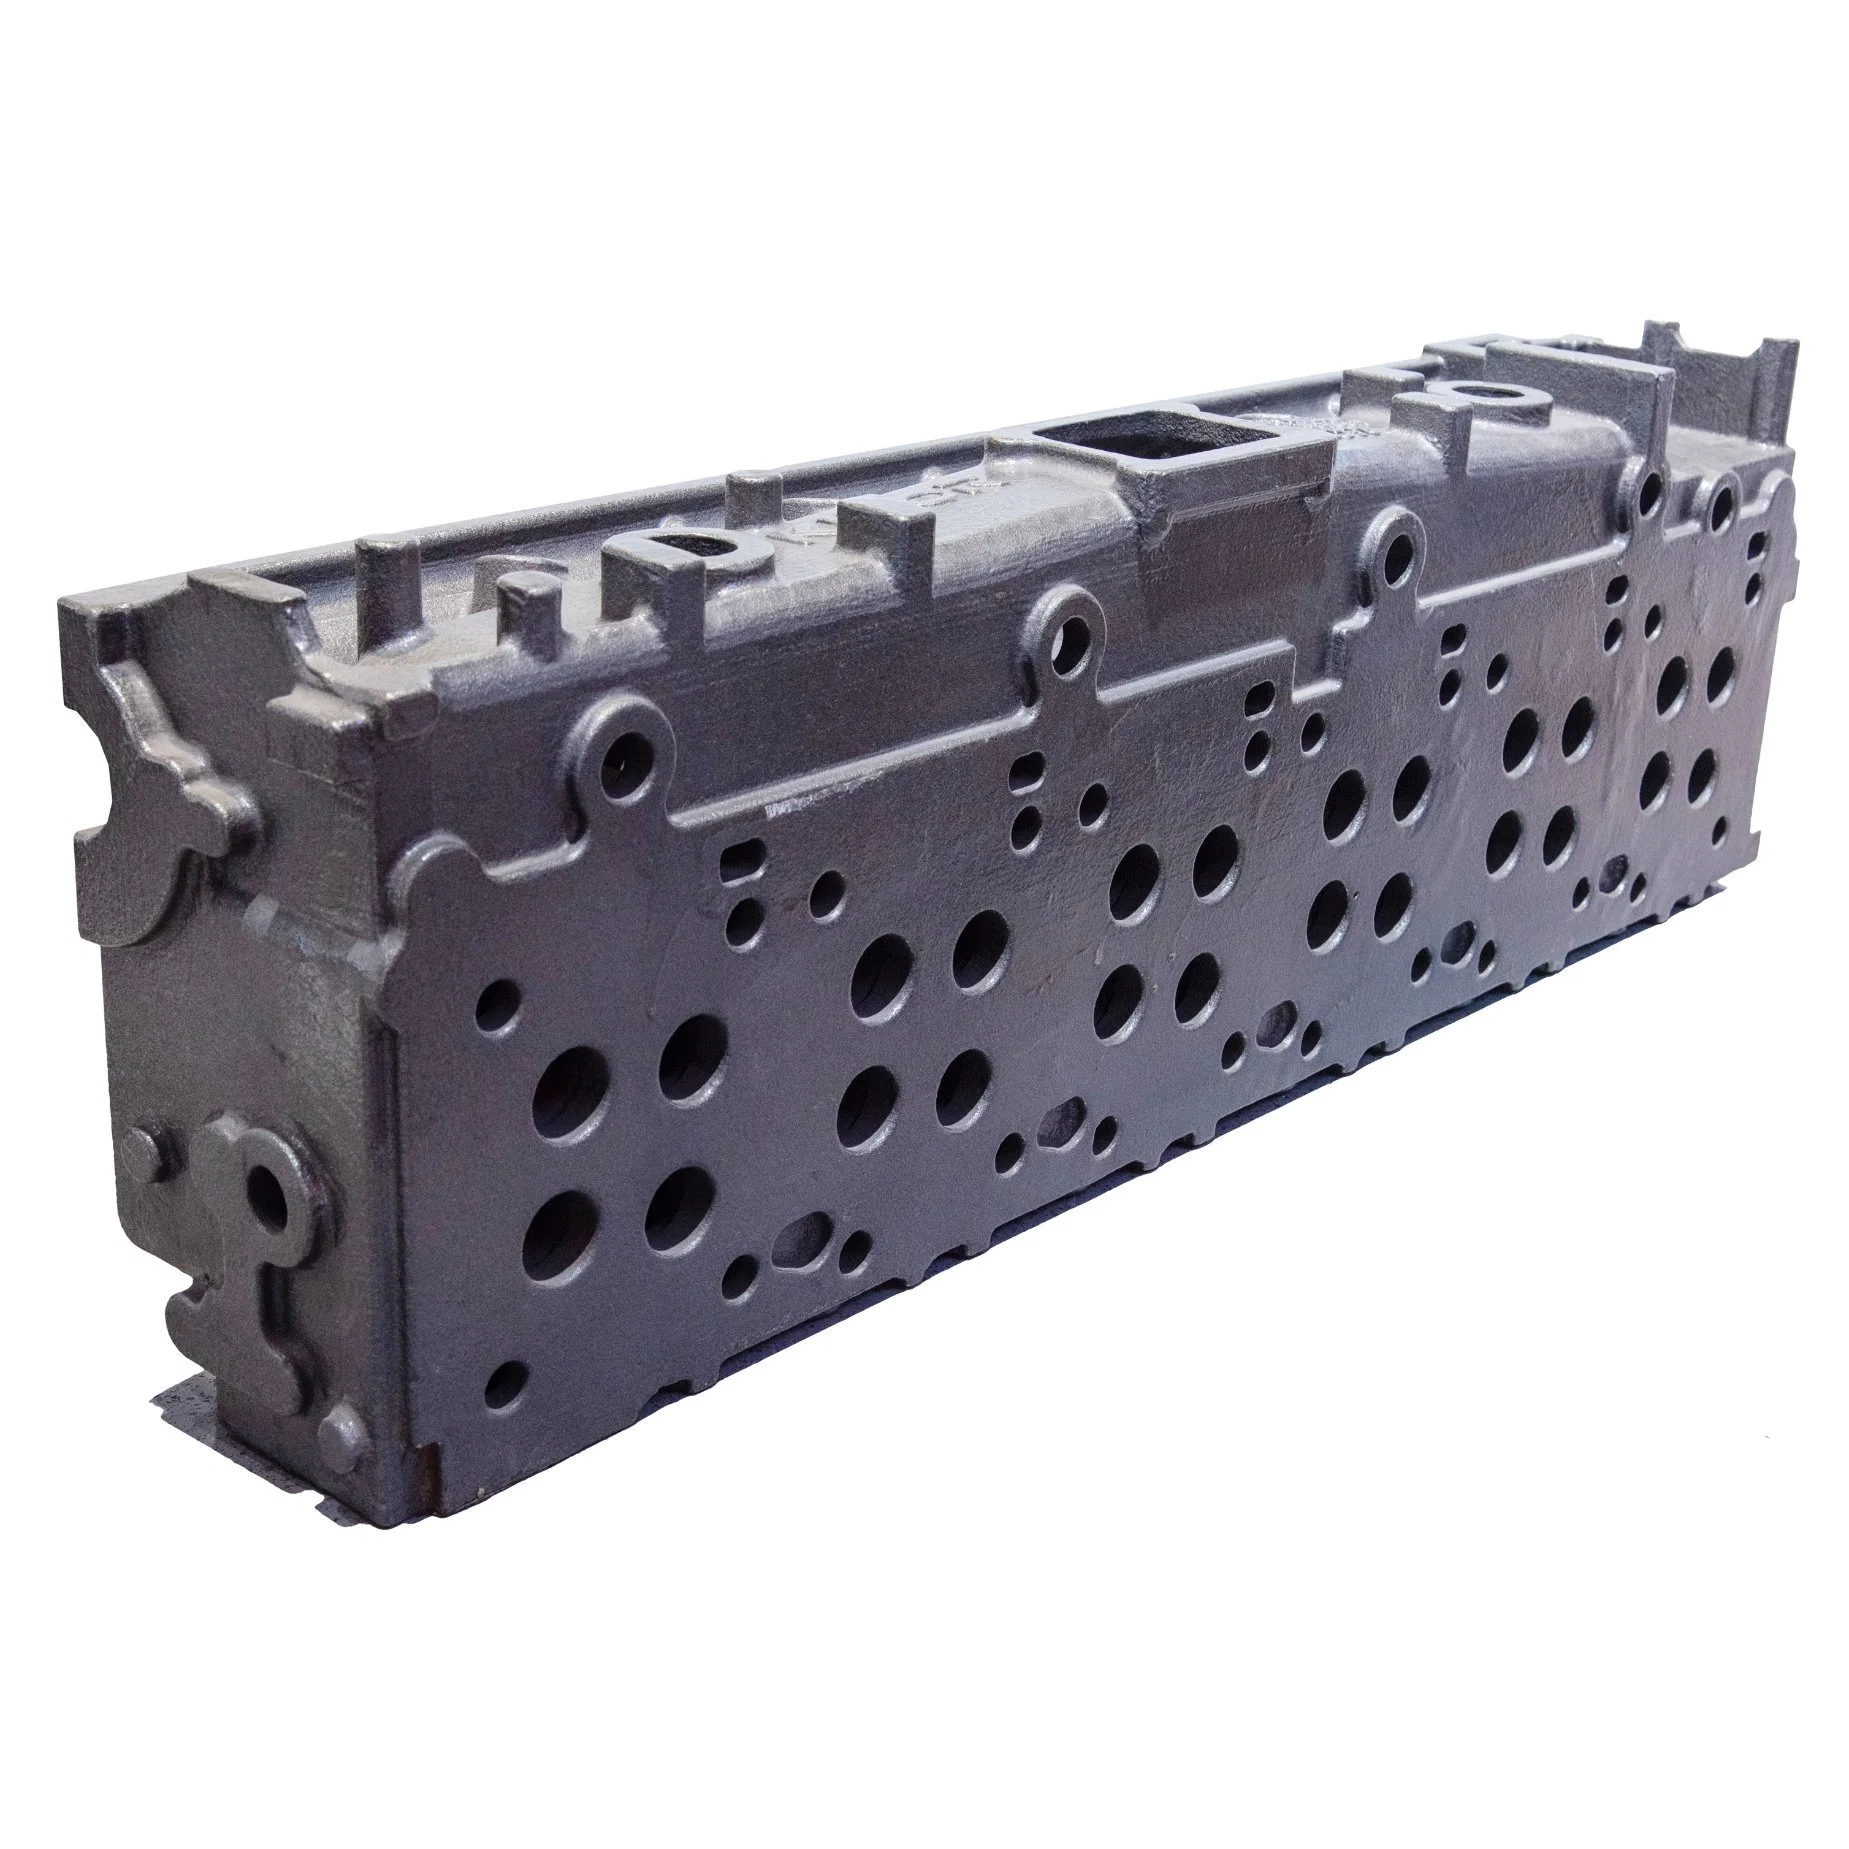 OEM Customized Aviation Auto Motorcycle Spare Parts Engine Block Cylinder Head Robot Arm Shell of Rapid Prototyping